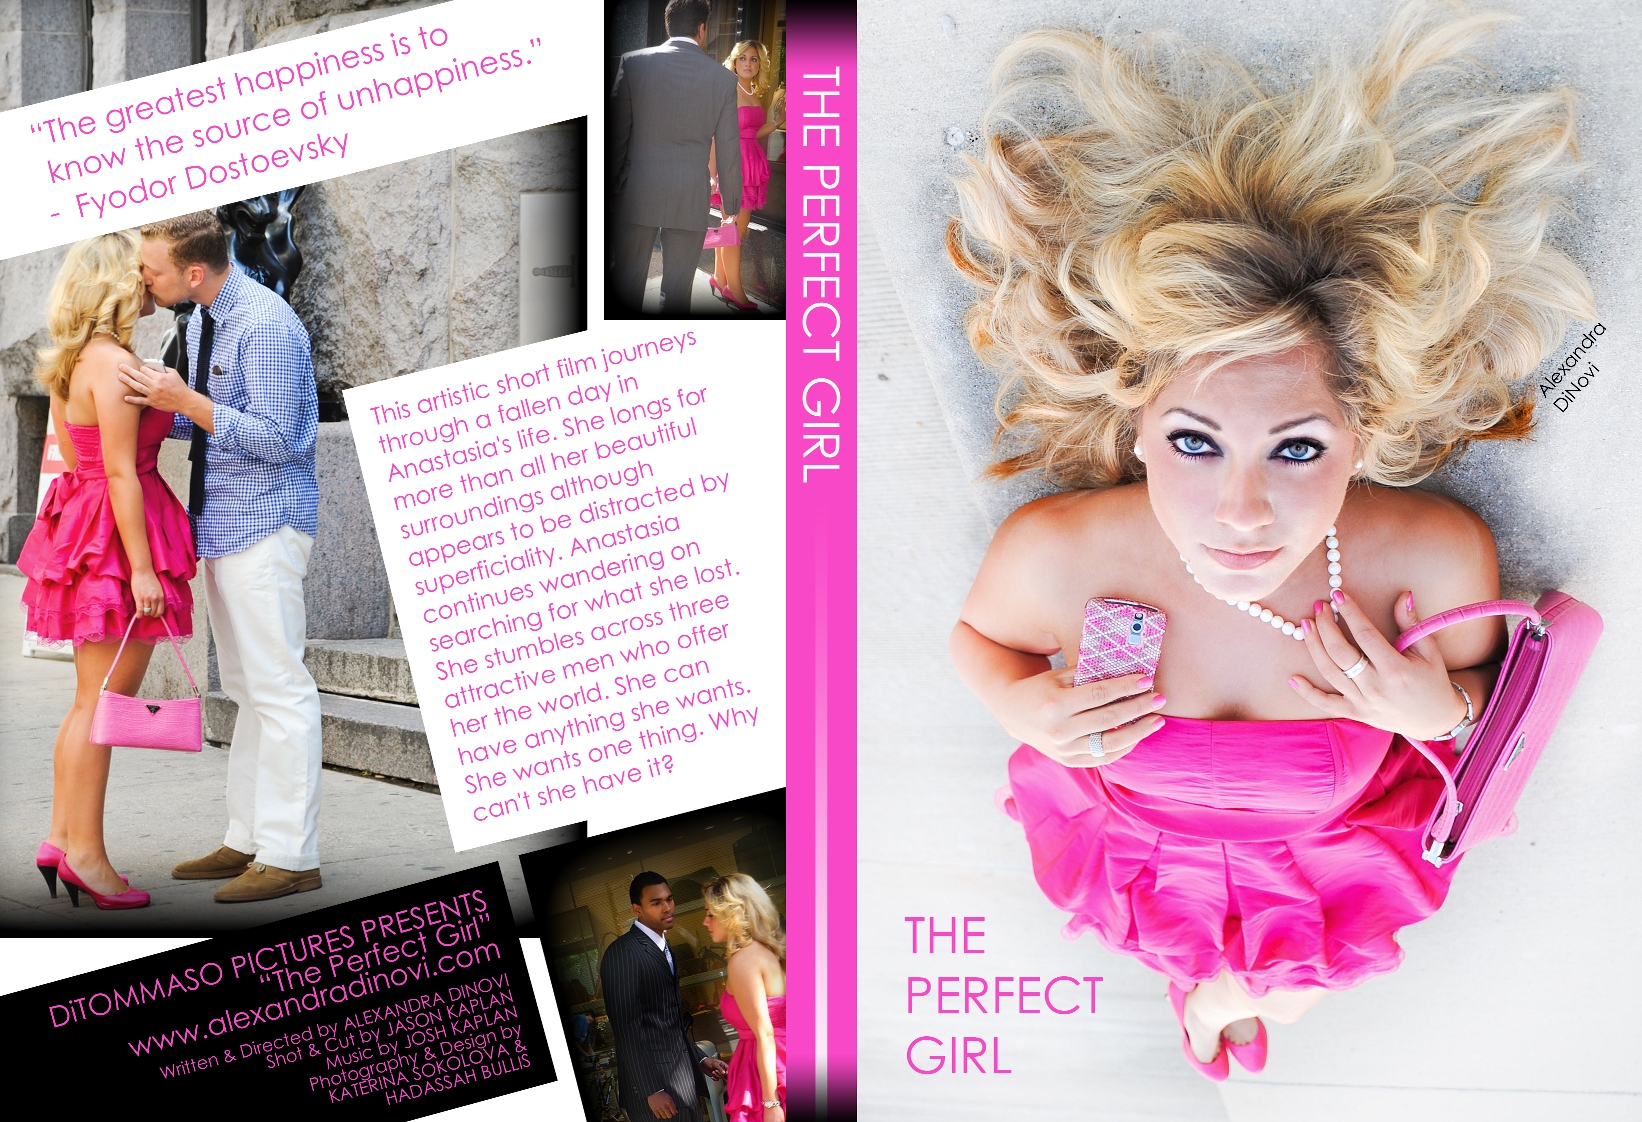 THE PERFECT GIRL dvd cover